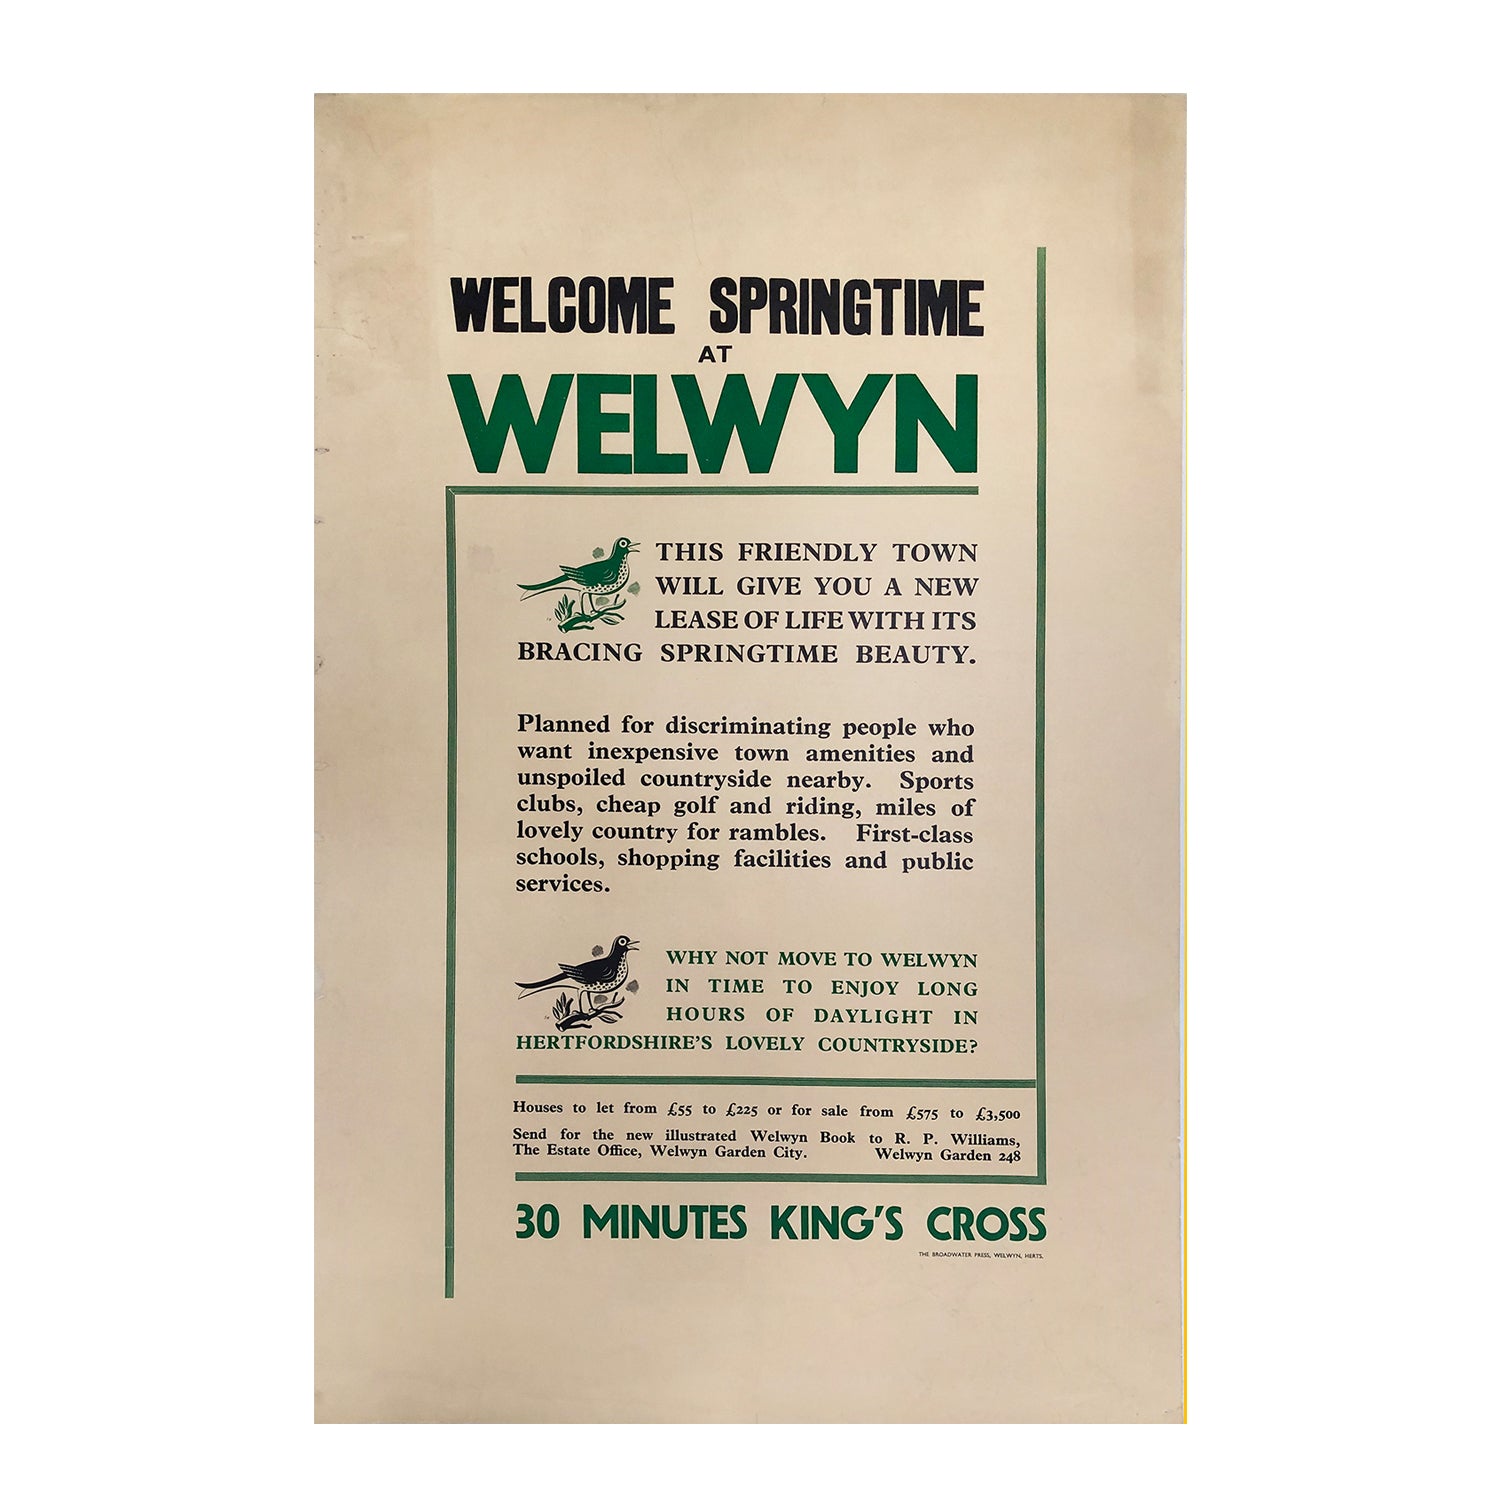 Original vintage poster promoting homes for sale in Welwyn Garden City, with illustrations by Stanley Herbert